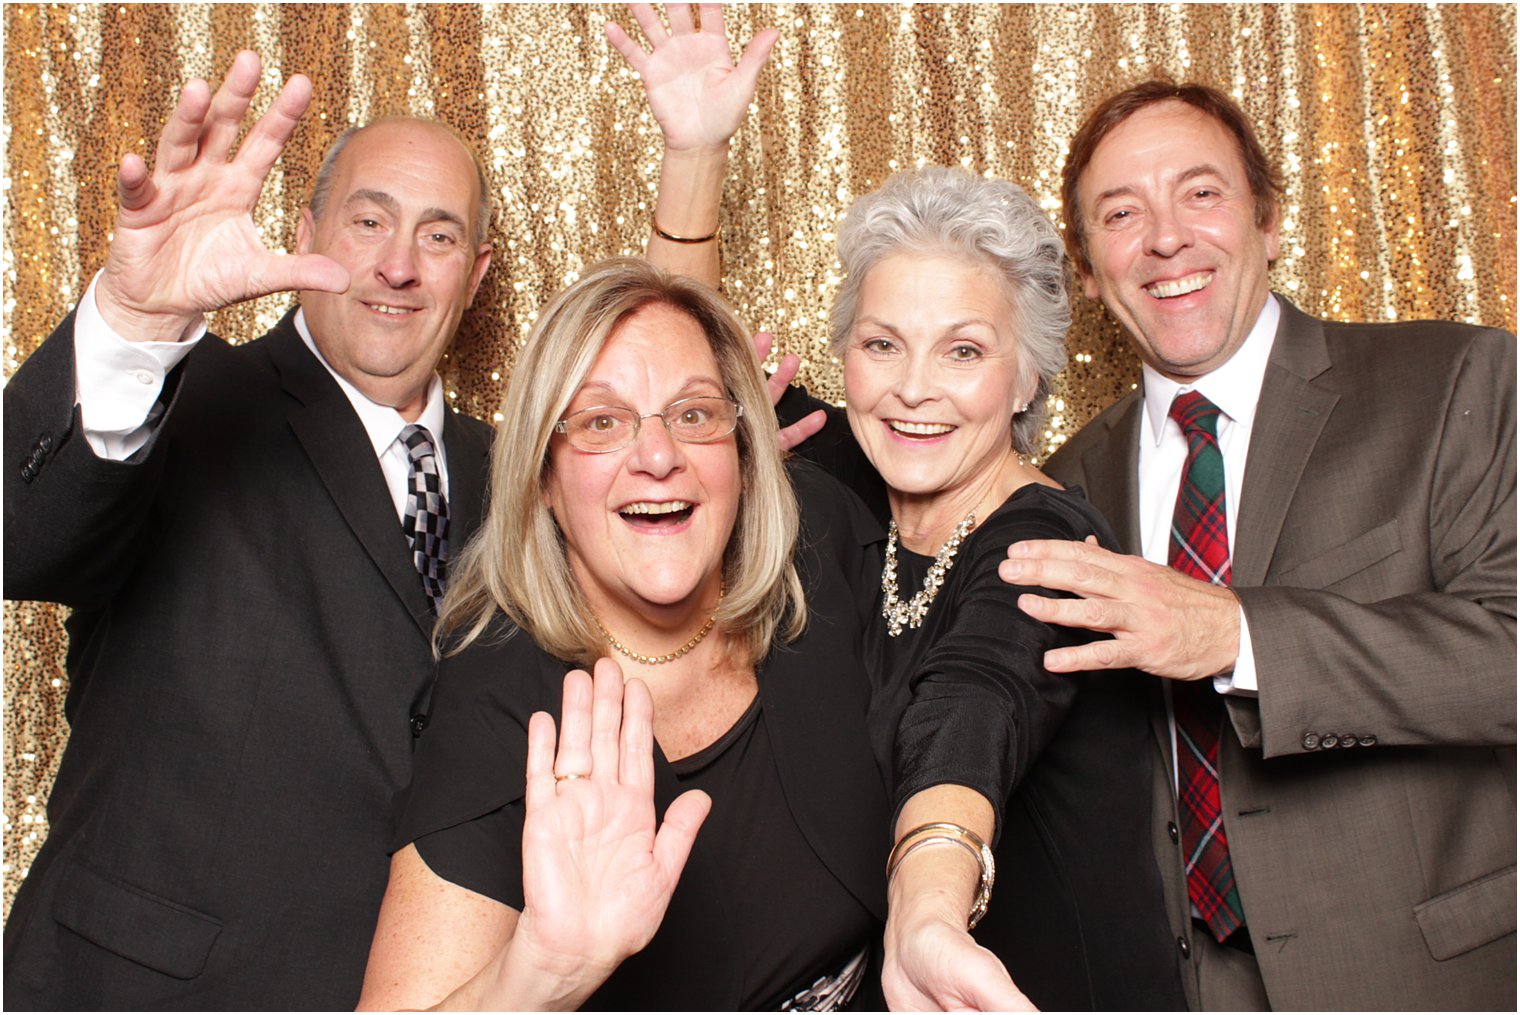 group of four adults pose during NJ wedding reception photo booth fun